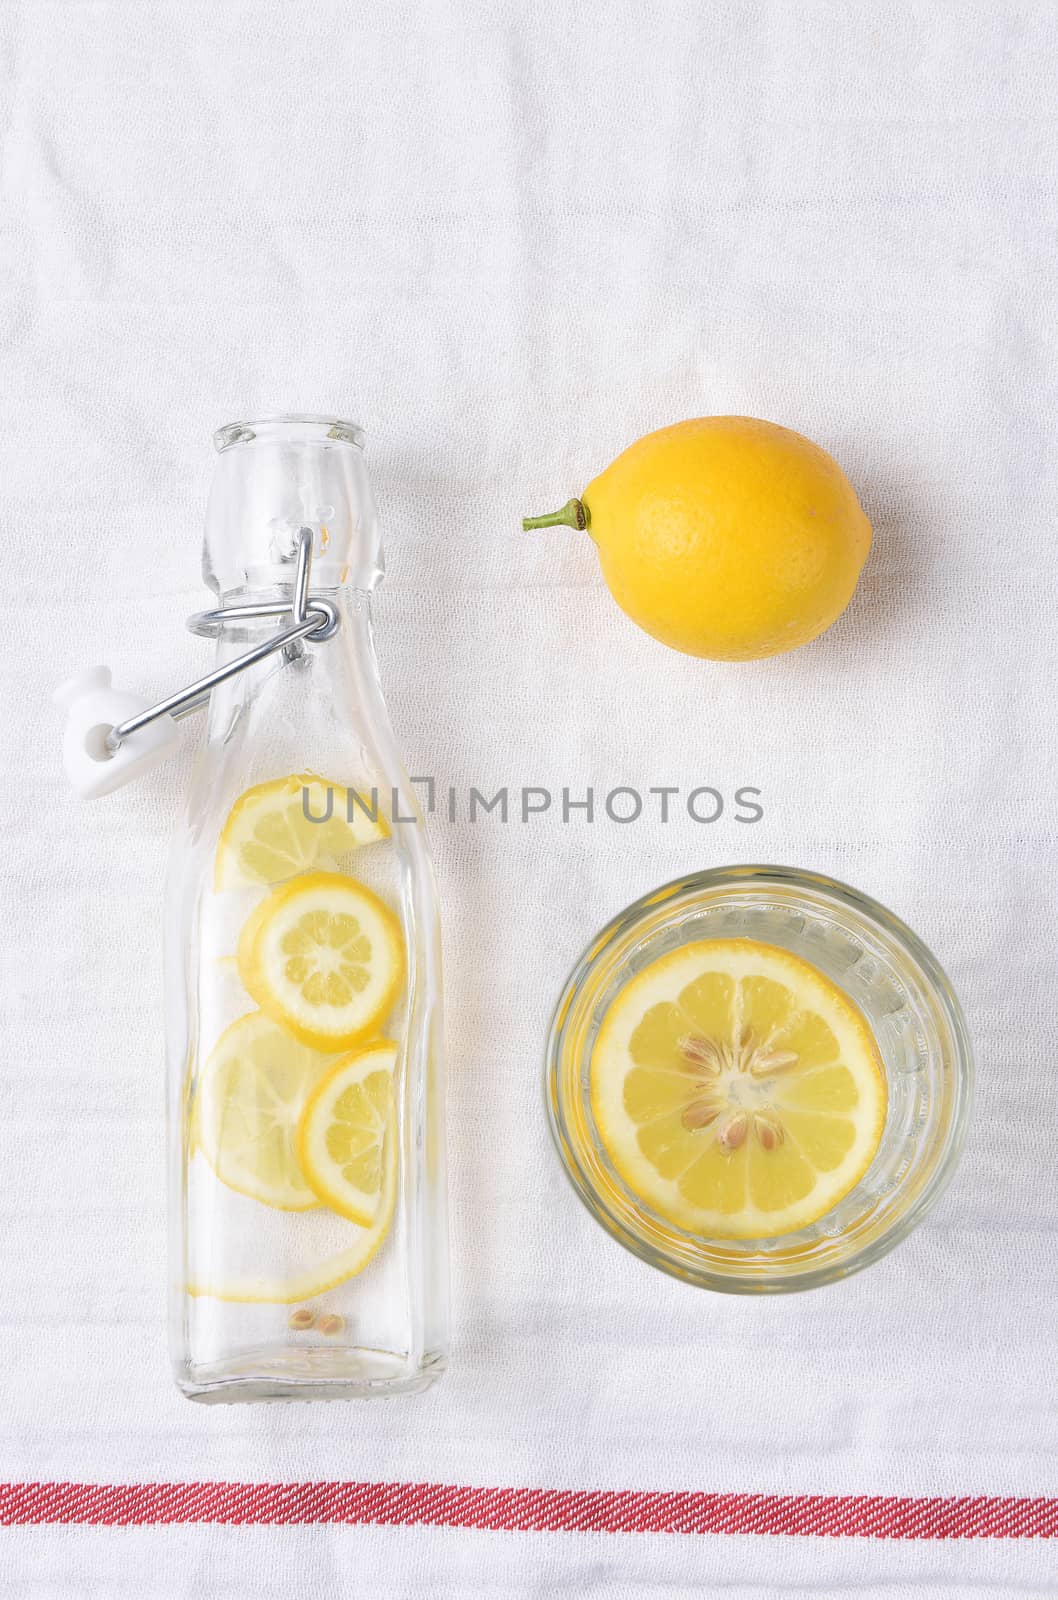 Top view of a glass of lemon water next to a swing bottle and whole piece of fruit.